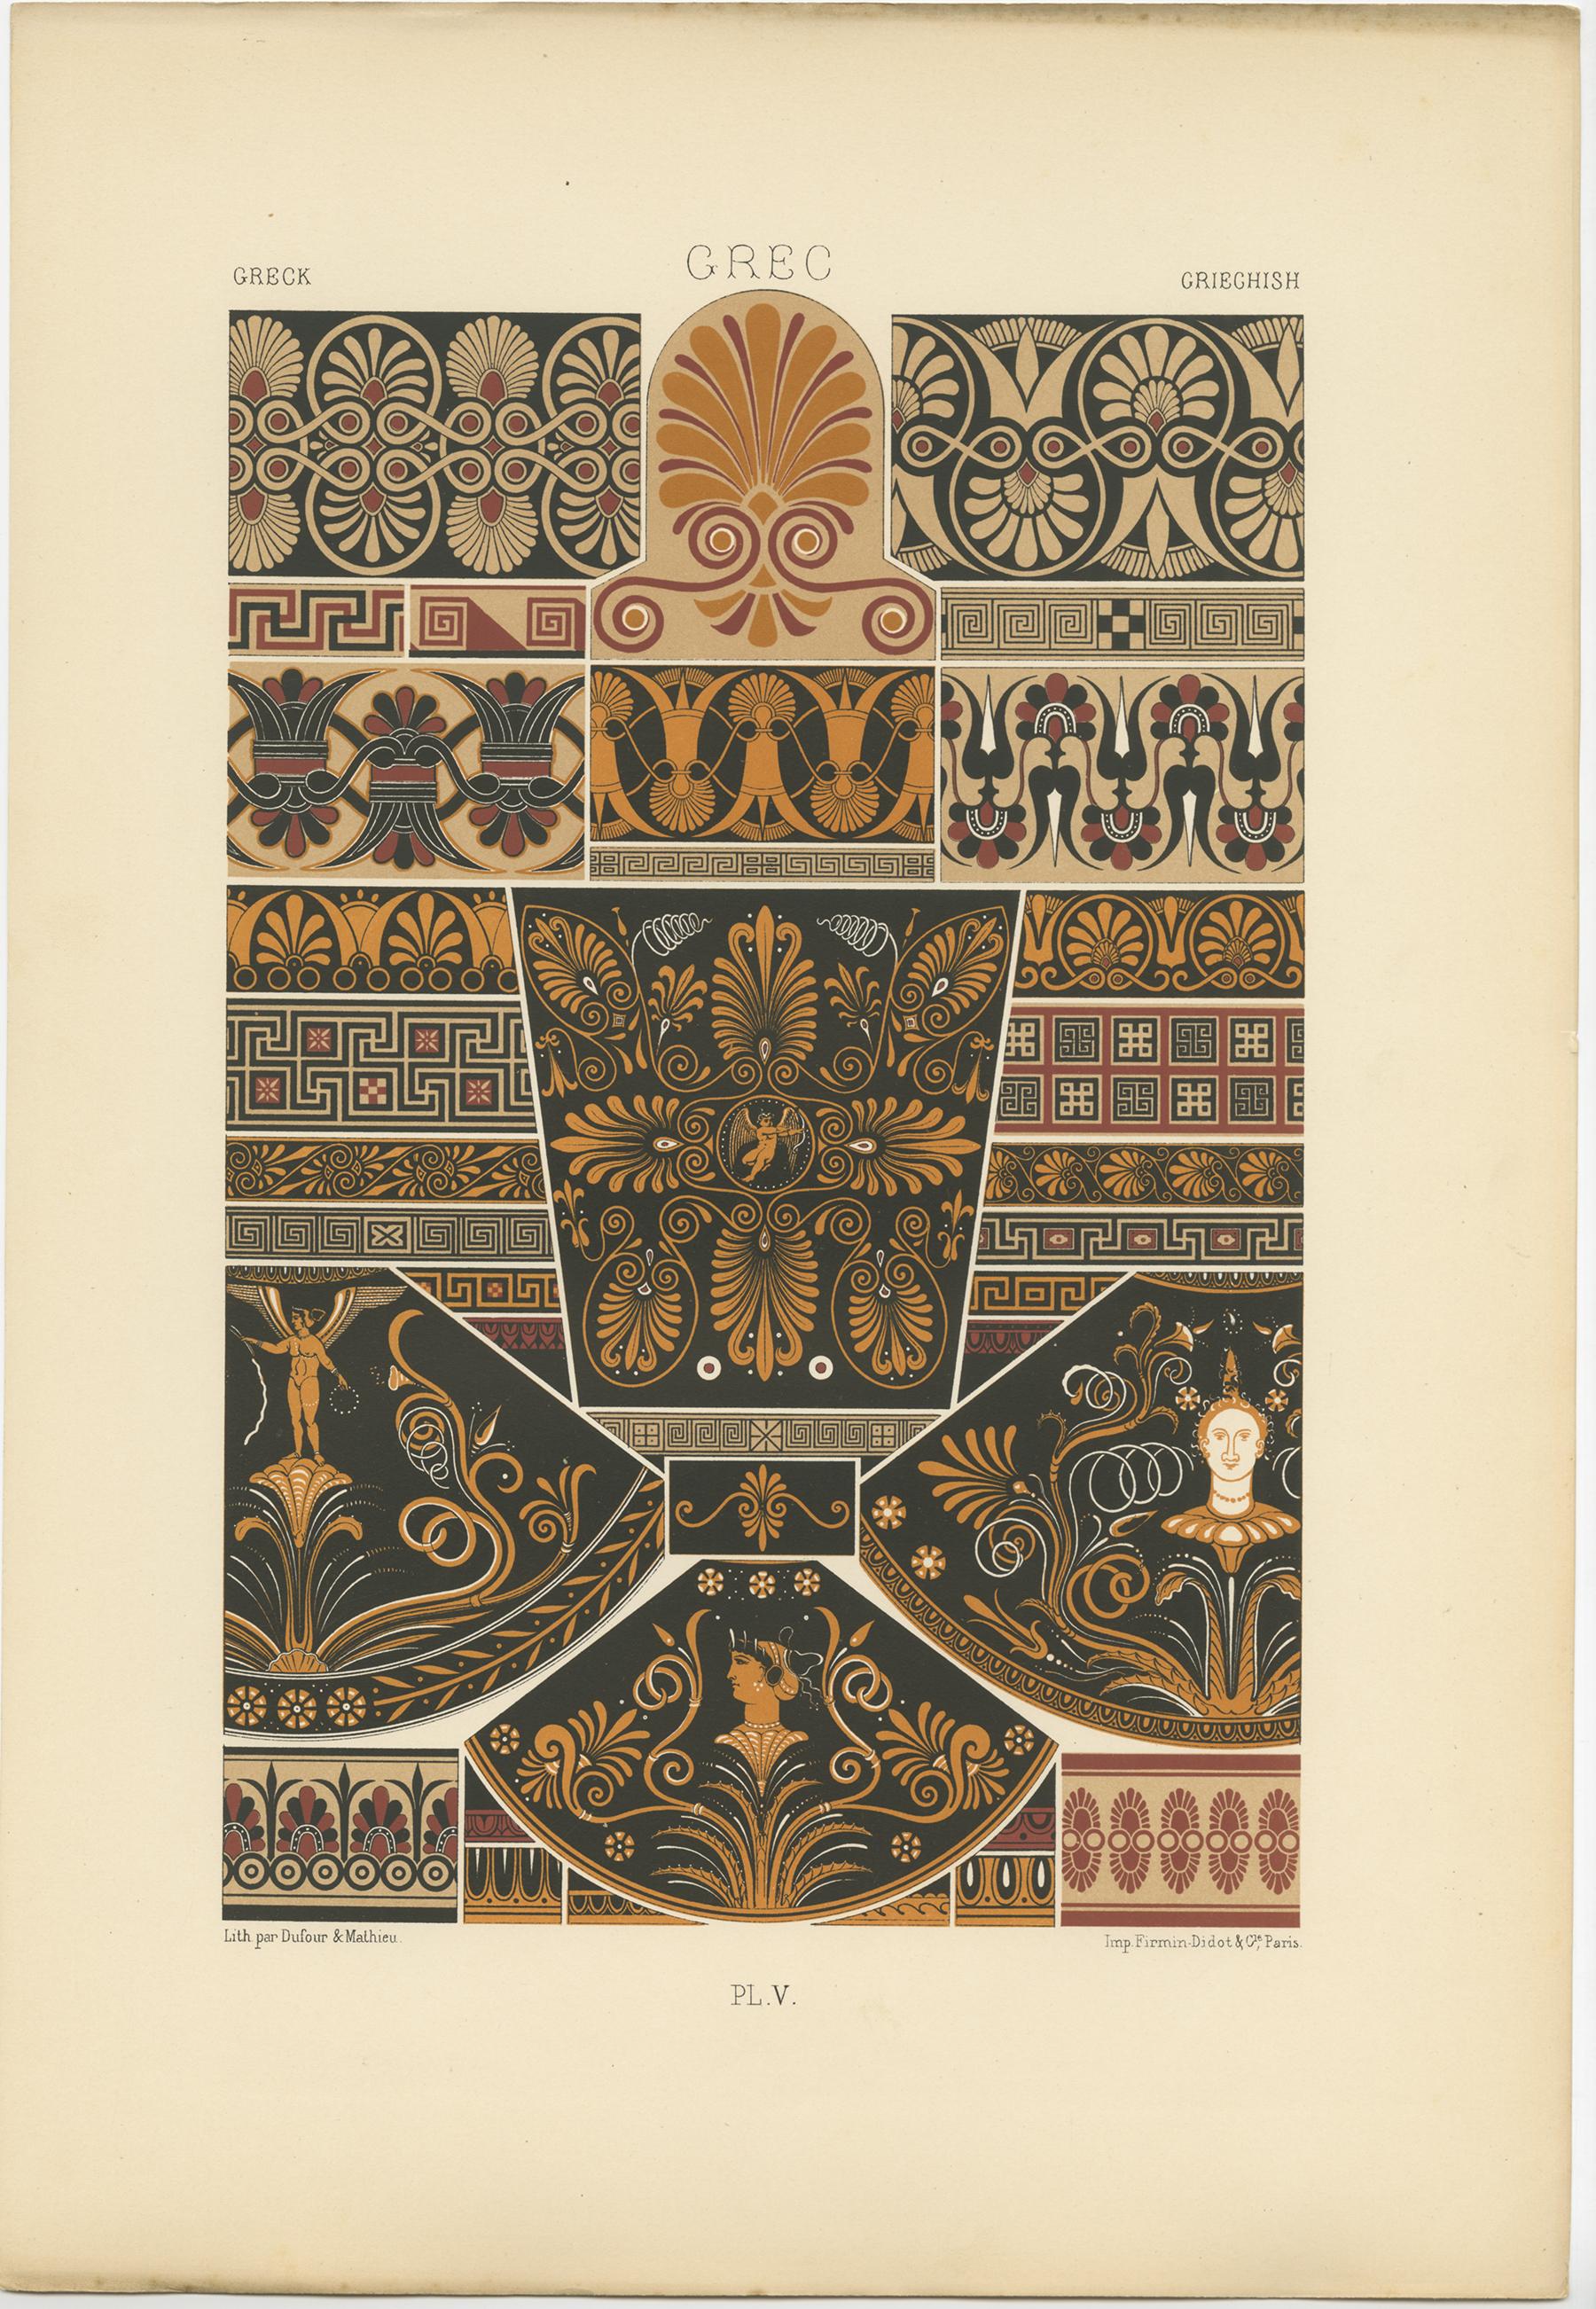 Antique print titled 'Greck - Grec - Griechish'. Chromolithograph of Greek ornaments and decorative arts. This print originates from 'l'Ornement Polychrome' by Auguste Racinet. Published, circa 1890.